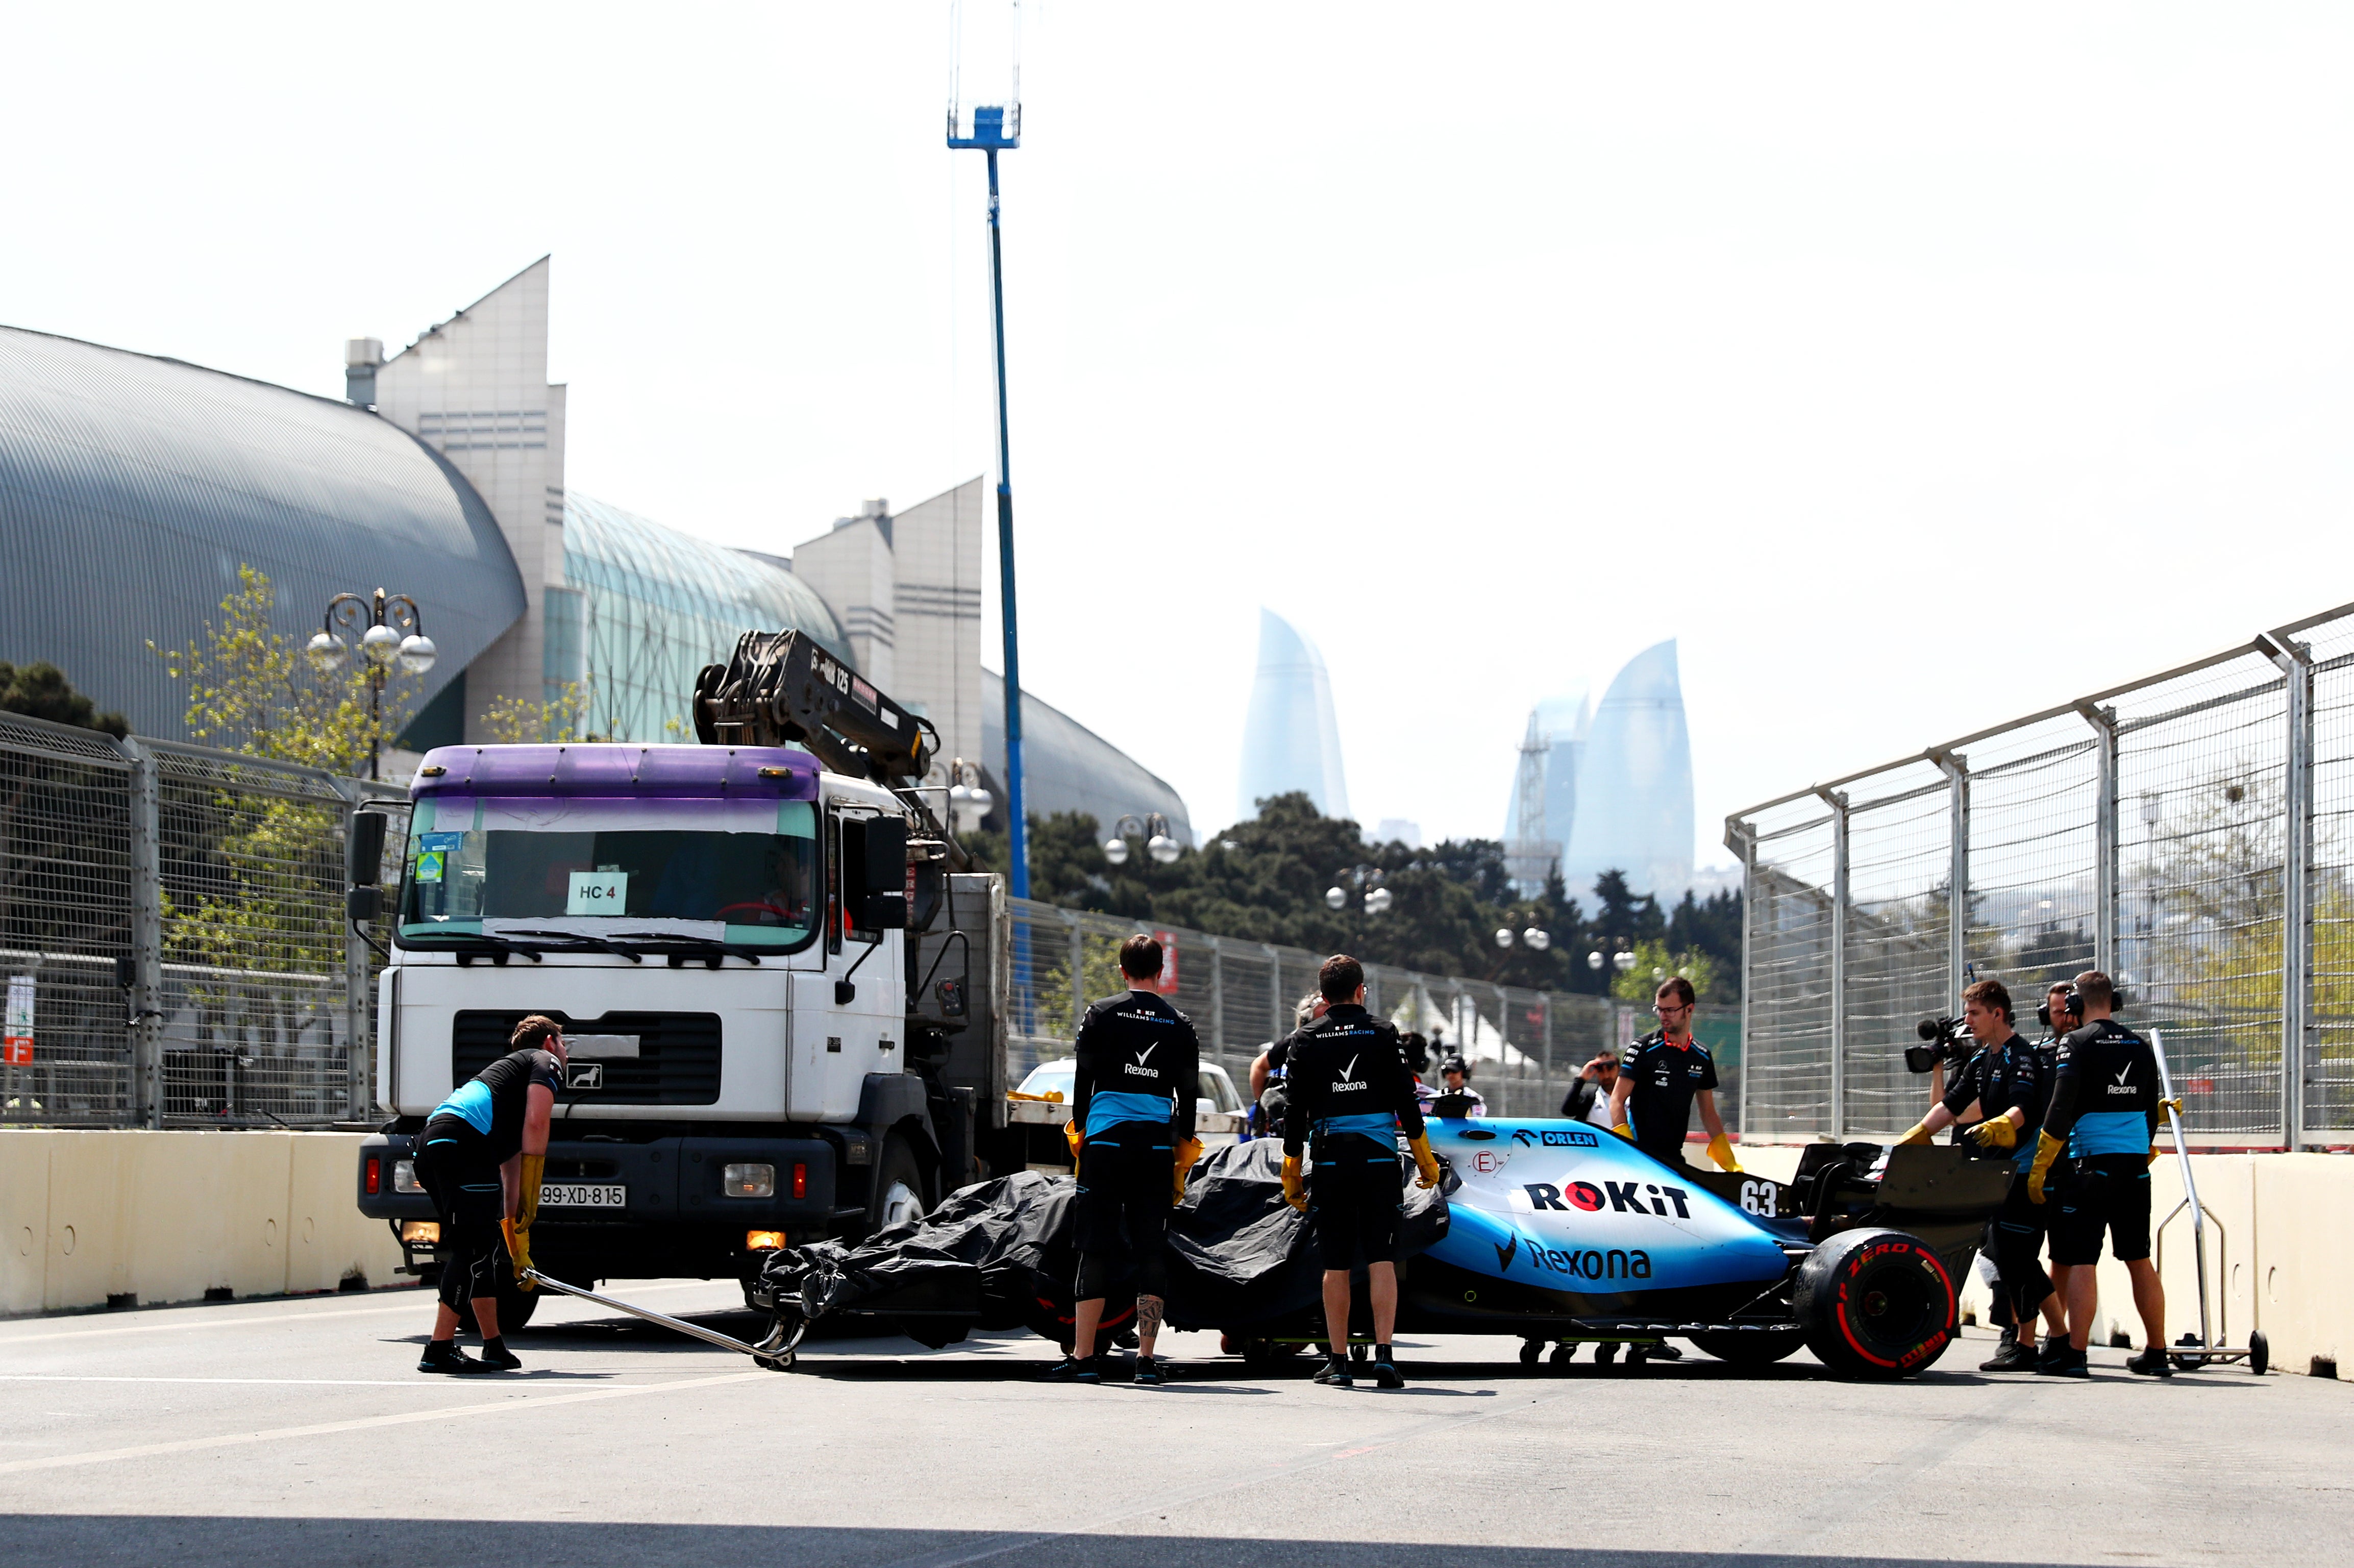 George Russell’s car suffered damage in an incident in Baku in 2019